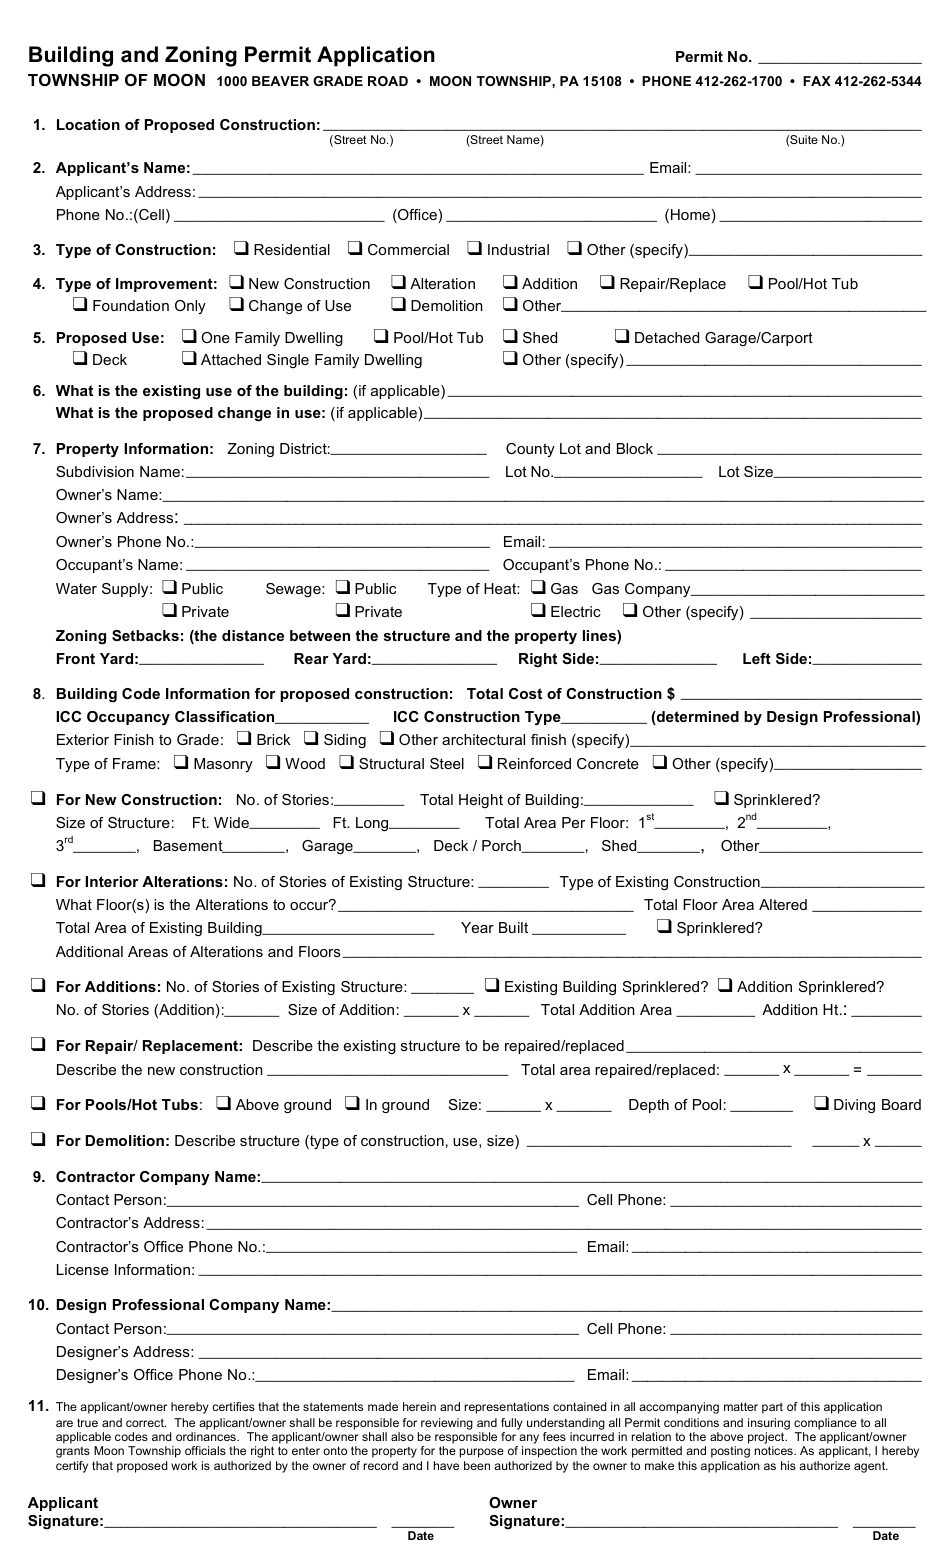 Building and Zoning Permit Application Form - Pennsylvania, Page 1